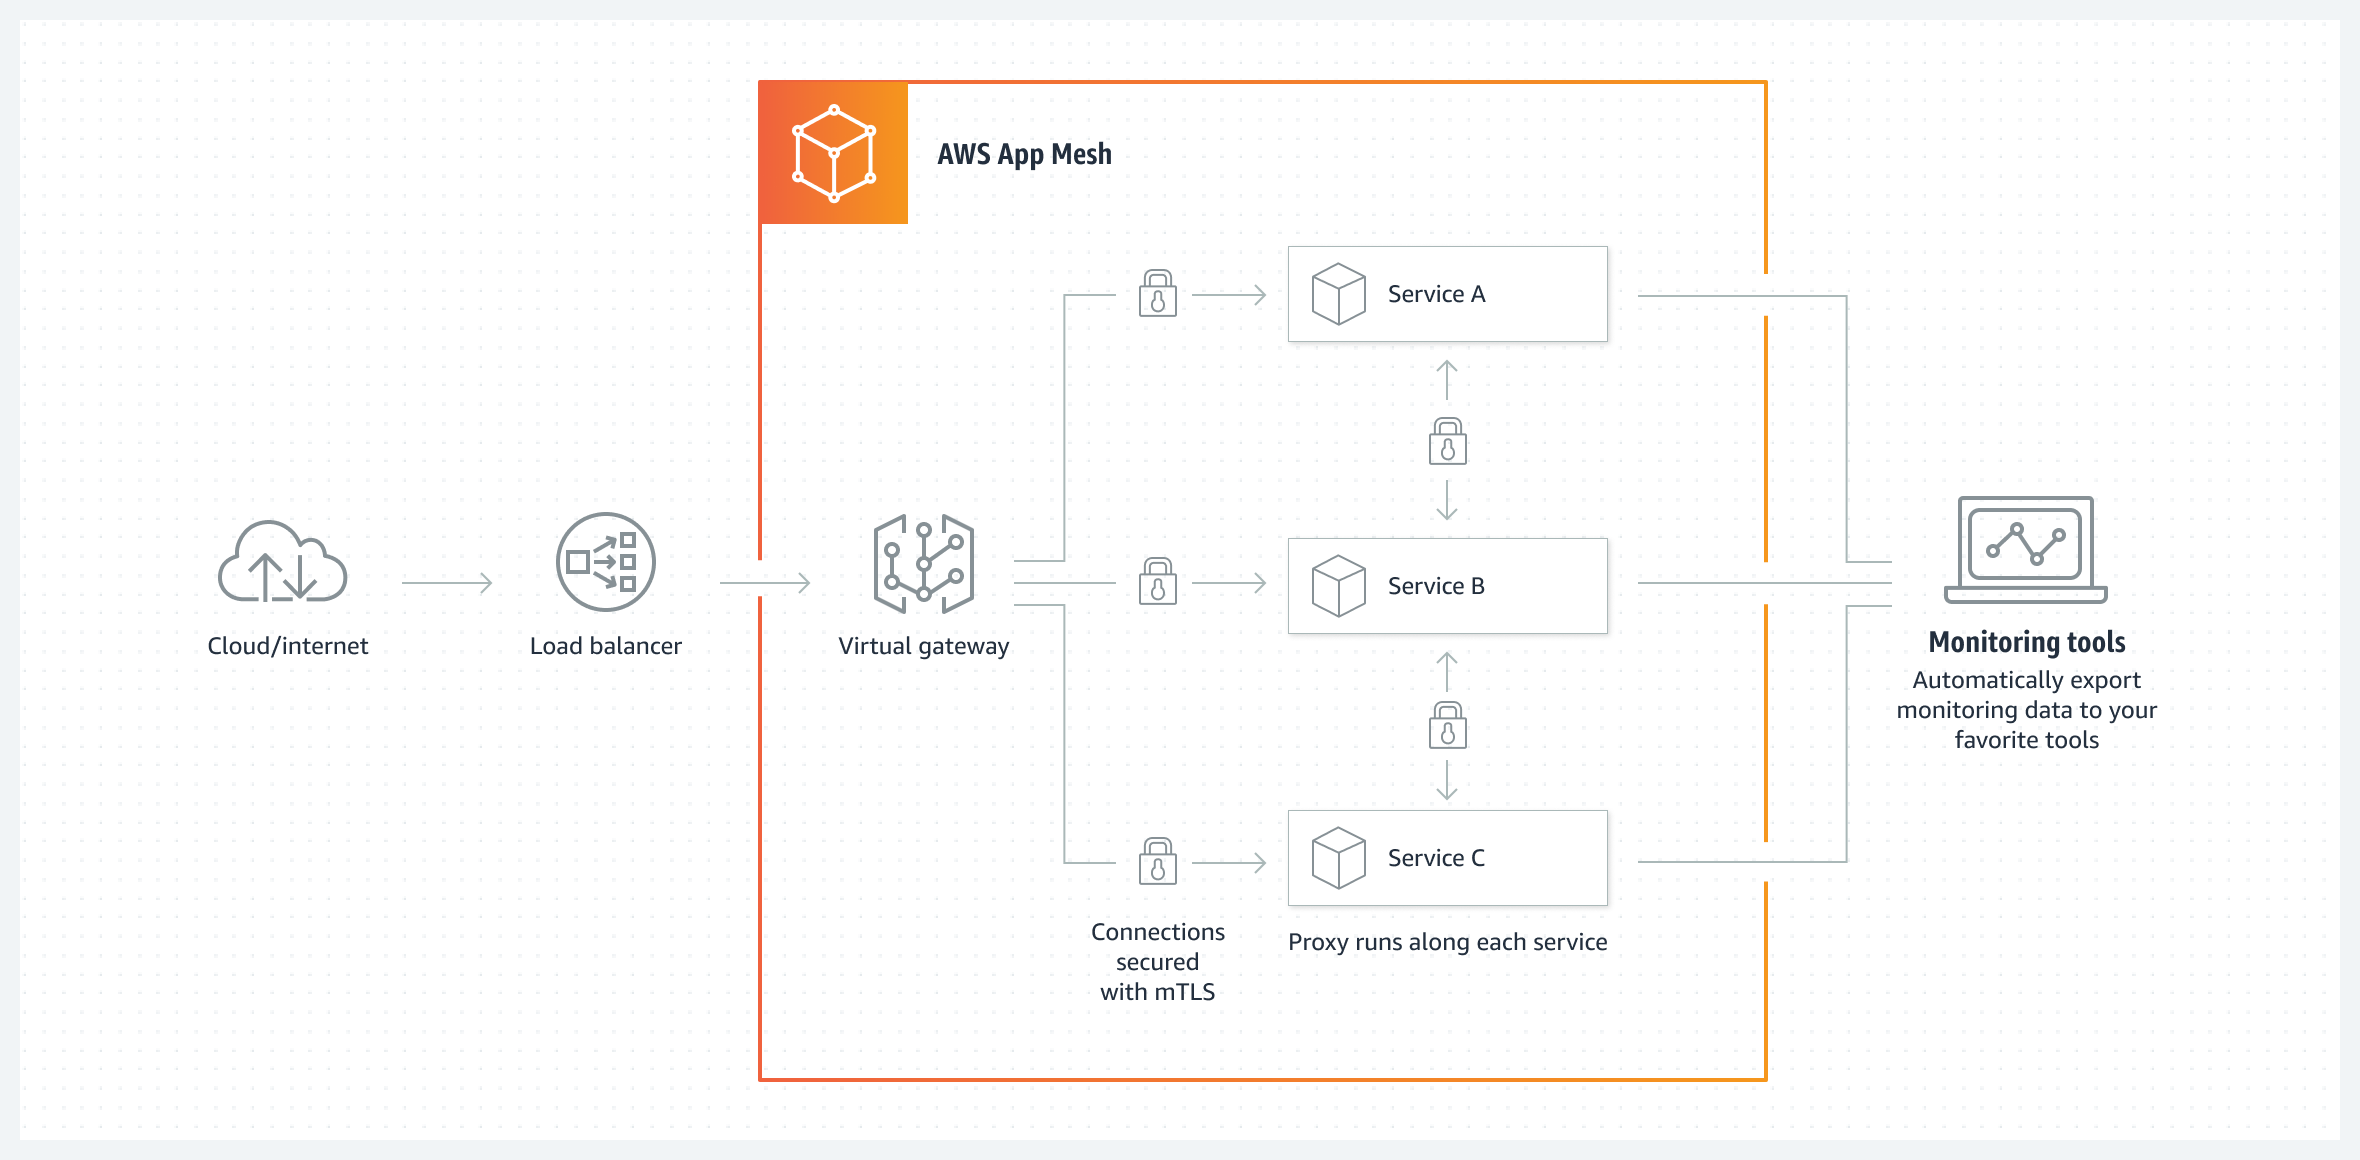 AWS App Mesh forms a service mesh for your application by providing an AWS managed control plane. The control plane helps you run microservices by providing consistent visibility and network traffic controls for each microservice in your application.